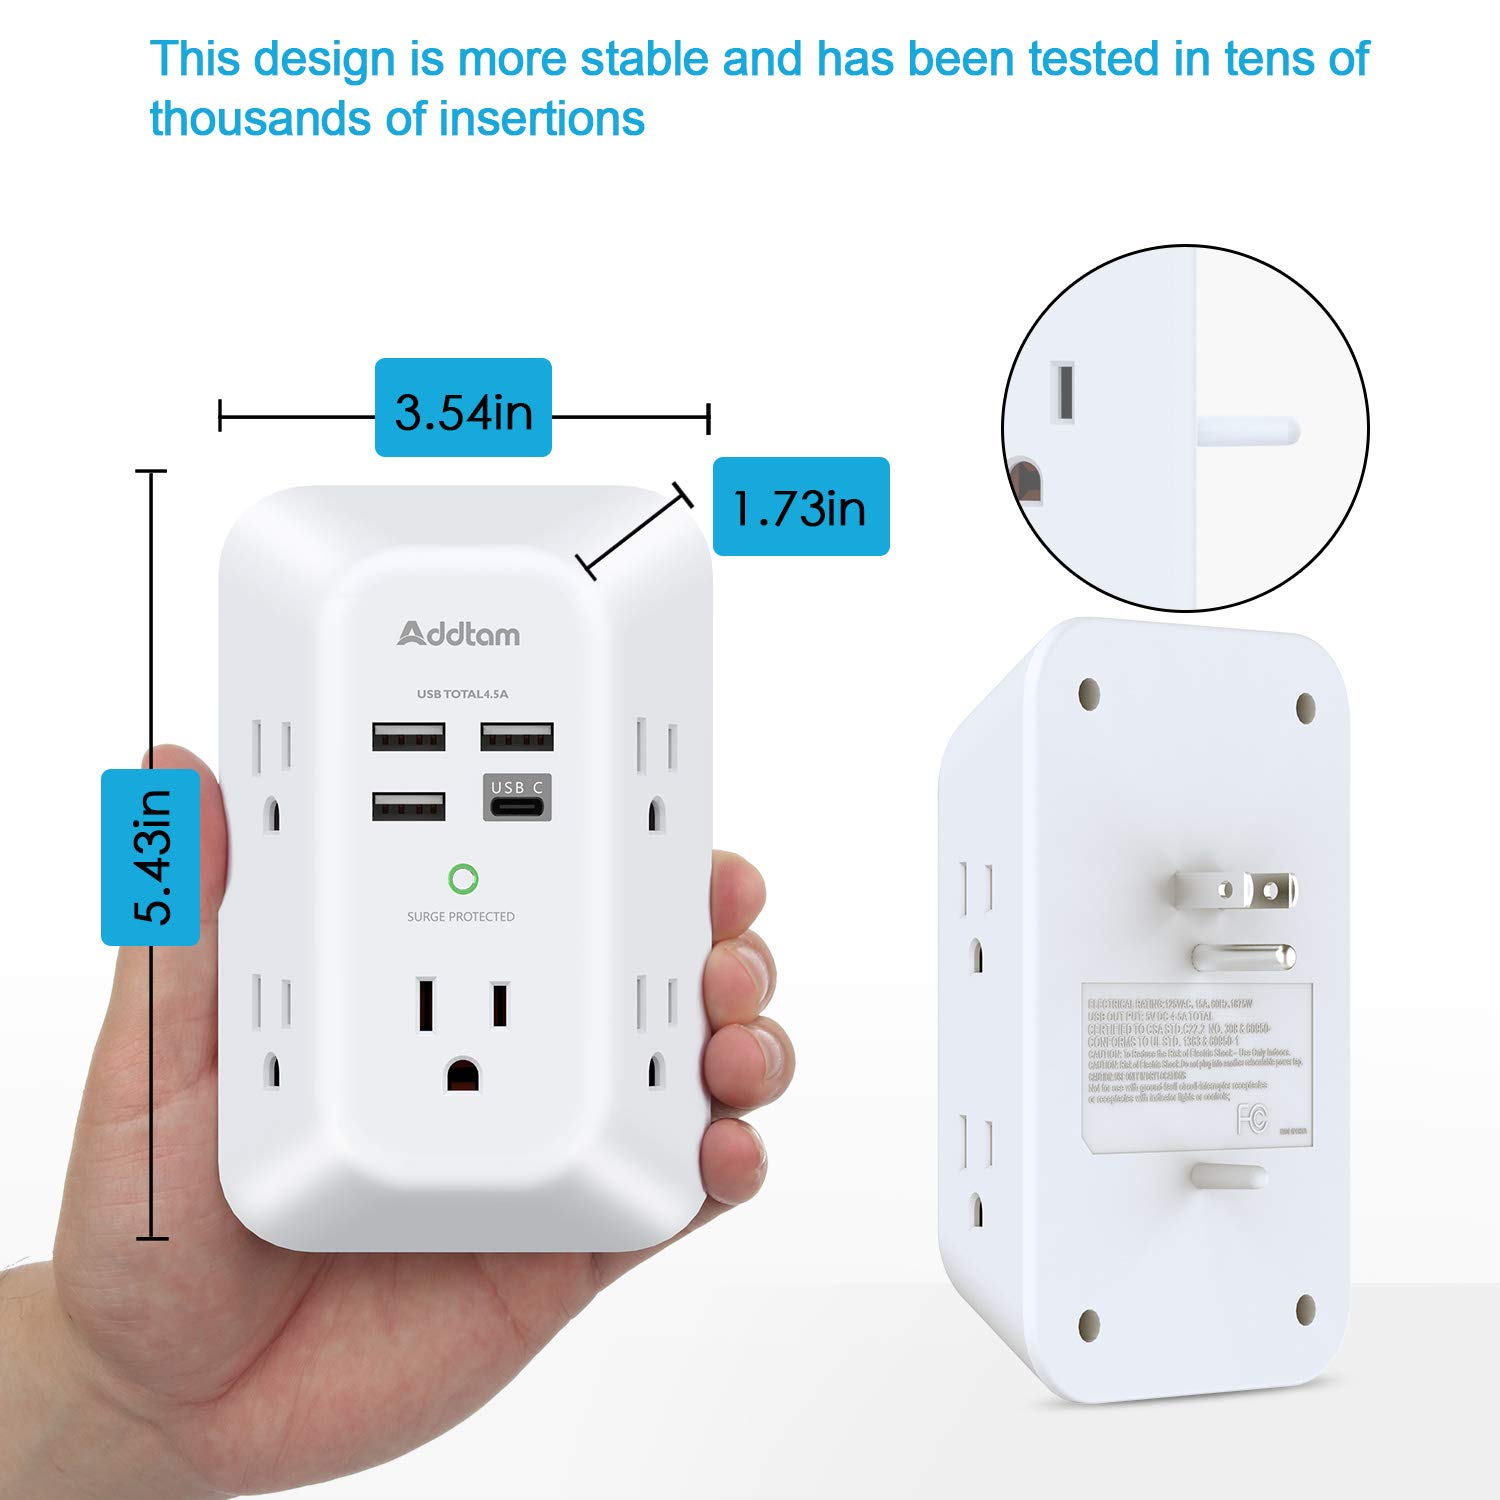 Addtam 5 Outlet 1800J Extender with 4 USB Charging Ports $8 at Amazon